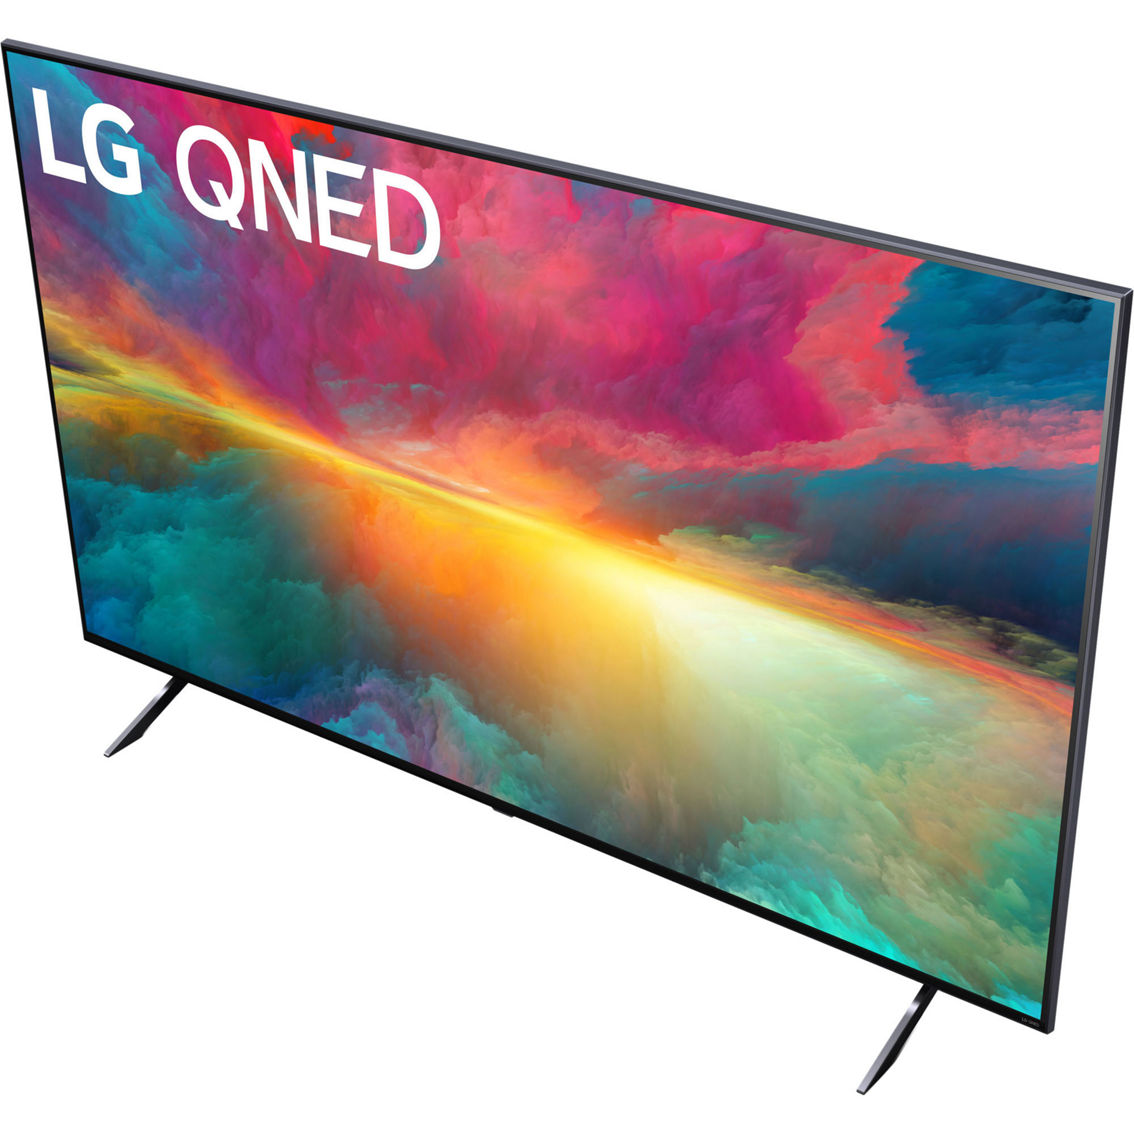 LG 50 in. QNED 4K HDR Smart TV with AI ThinQ 50QNED75URA - Image 5 of 10